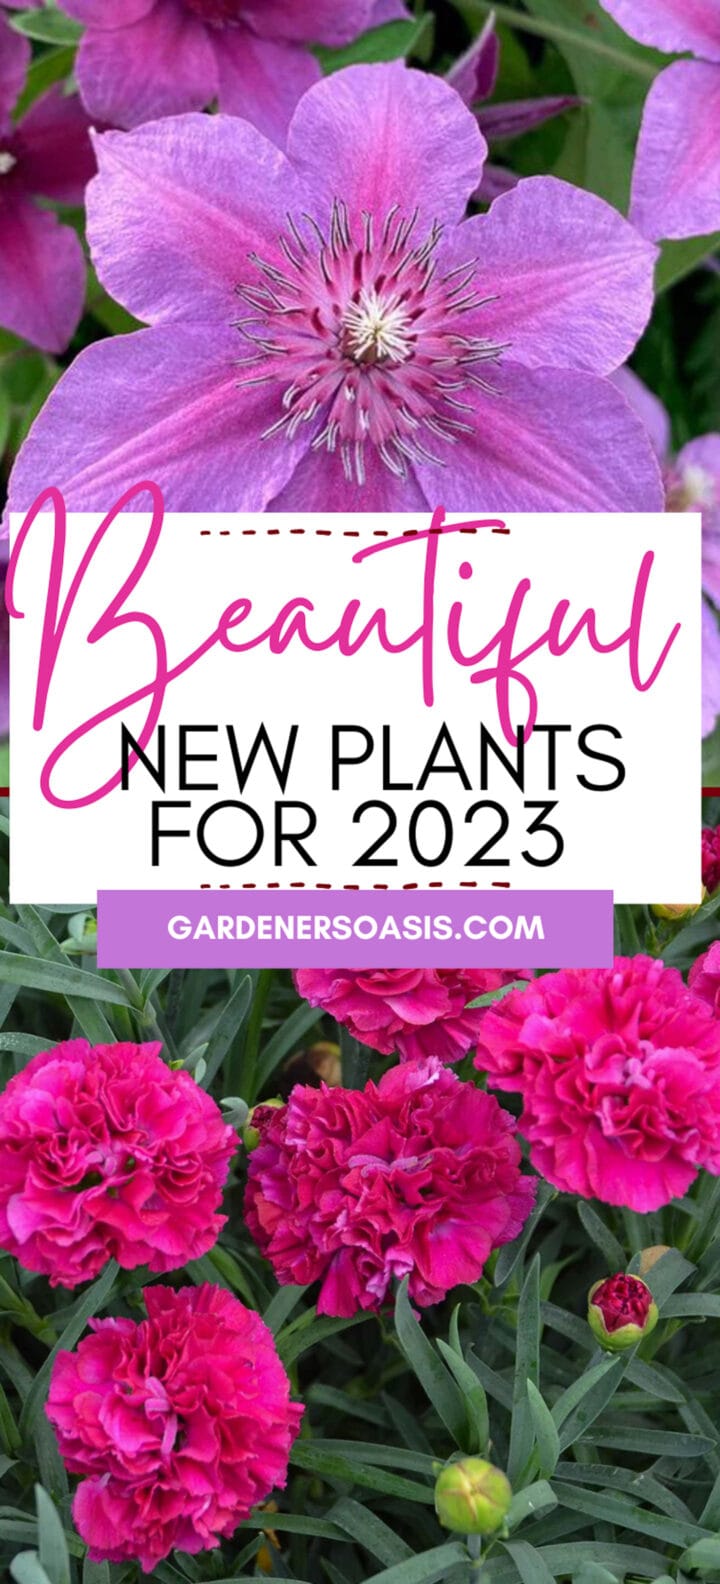 New Plants For 2023 (18 Of The Best New Perennials and Shrubs)